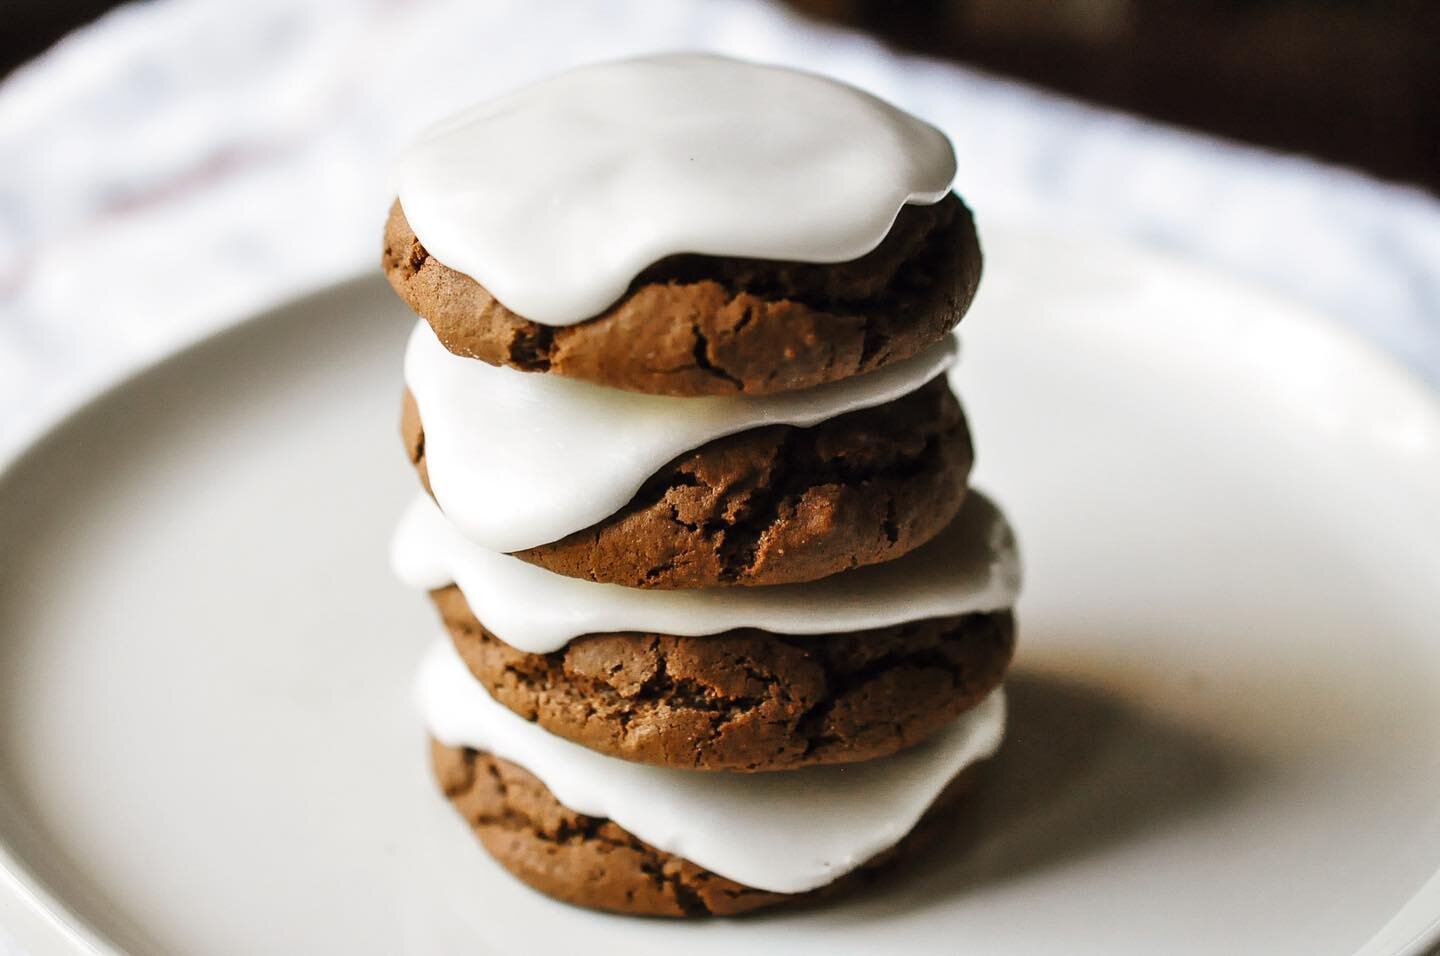 These are Tijuana Fiesta cookies &ndash; soft, warmly spiced, with a buttery, sweet icing &ndash; adapted from a recipe by one of our favorite bakery inspirations, Maida Heatter (more on her later!). They&rsquo;re on our Cinco de Mayo menu and believ